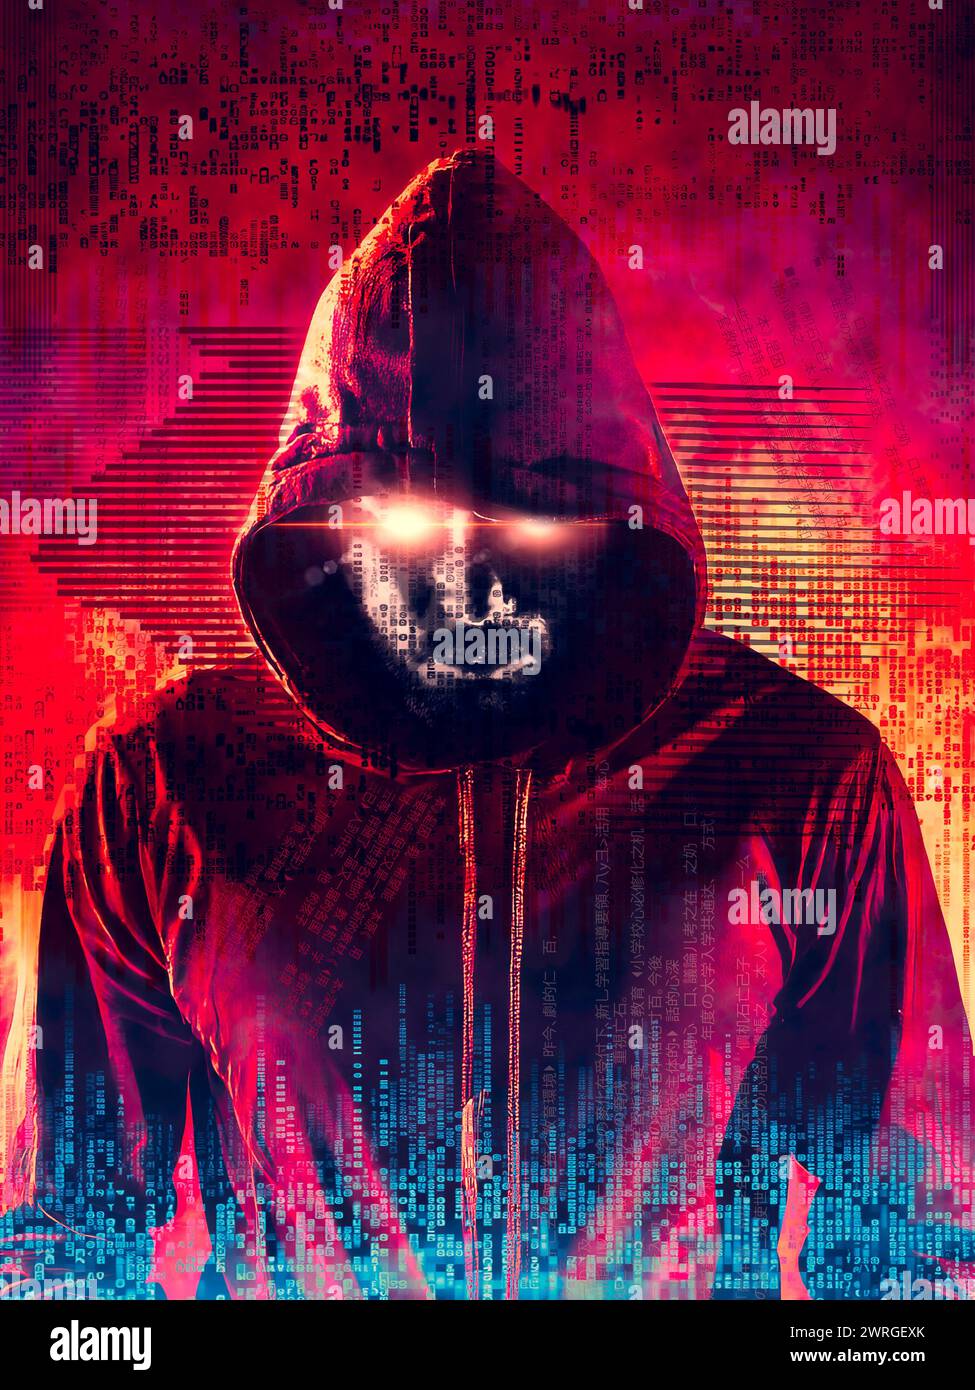 Hacker boy with hood, power of programming. Cutting-edge technology, use of artificial intelligence to expand and speed up programming processes Stock Photo